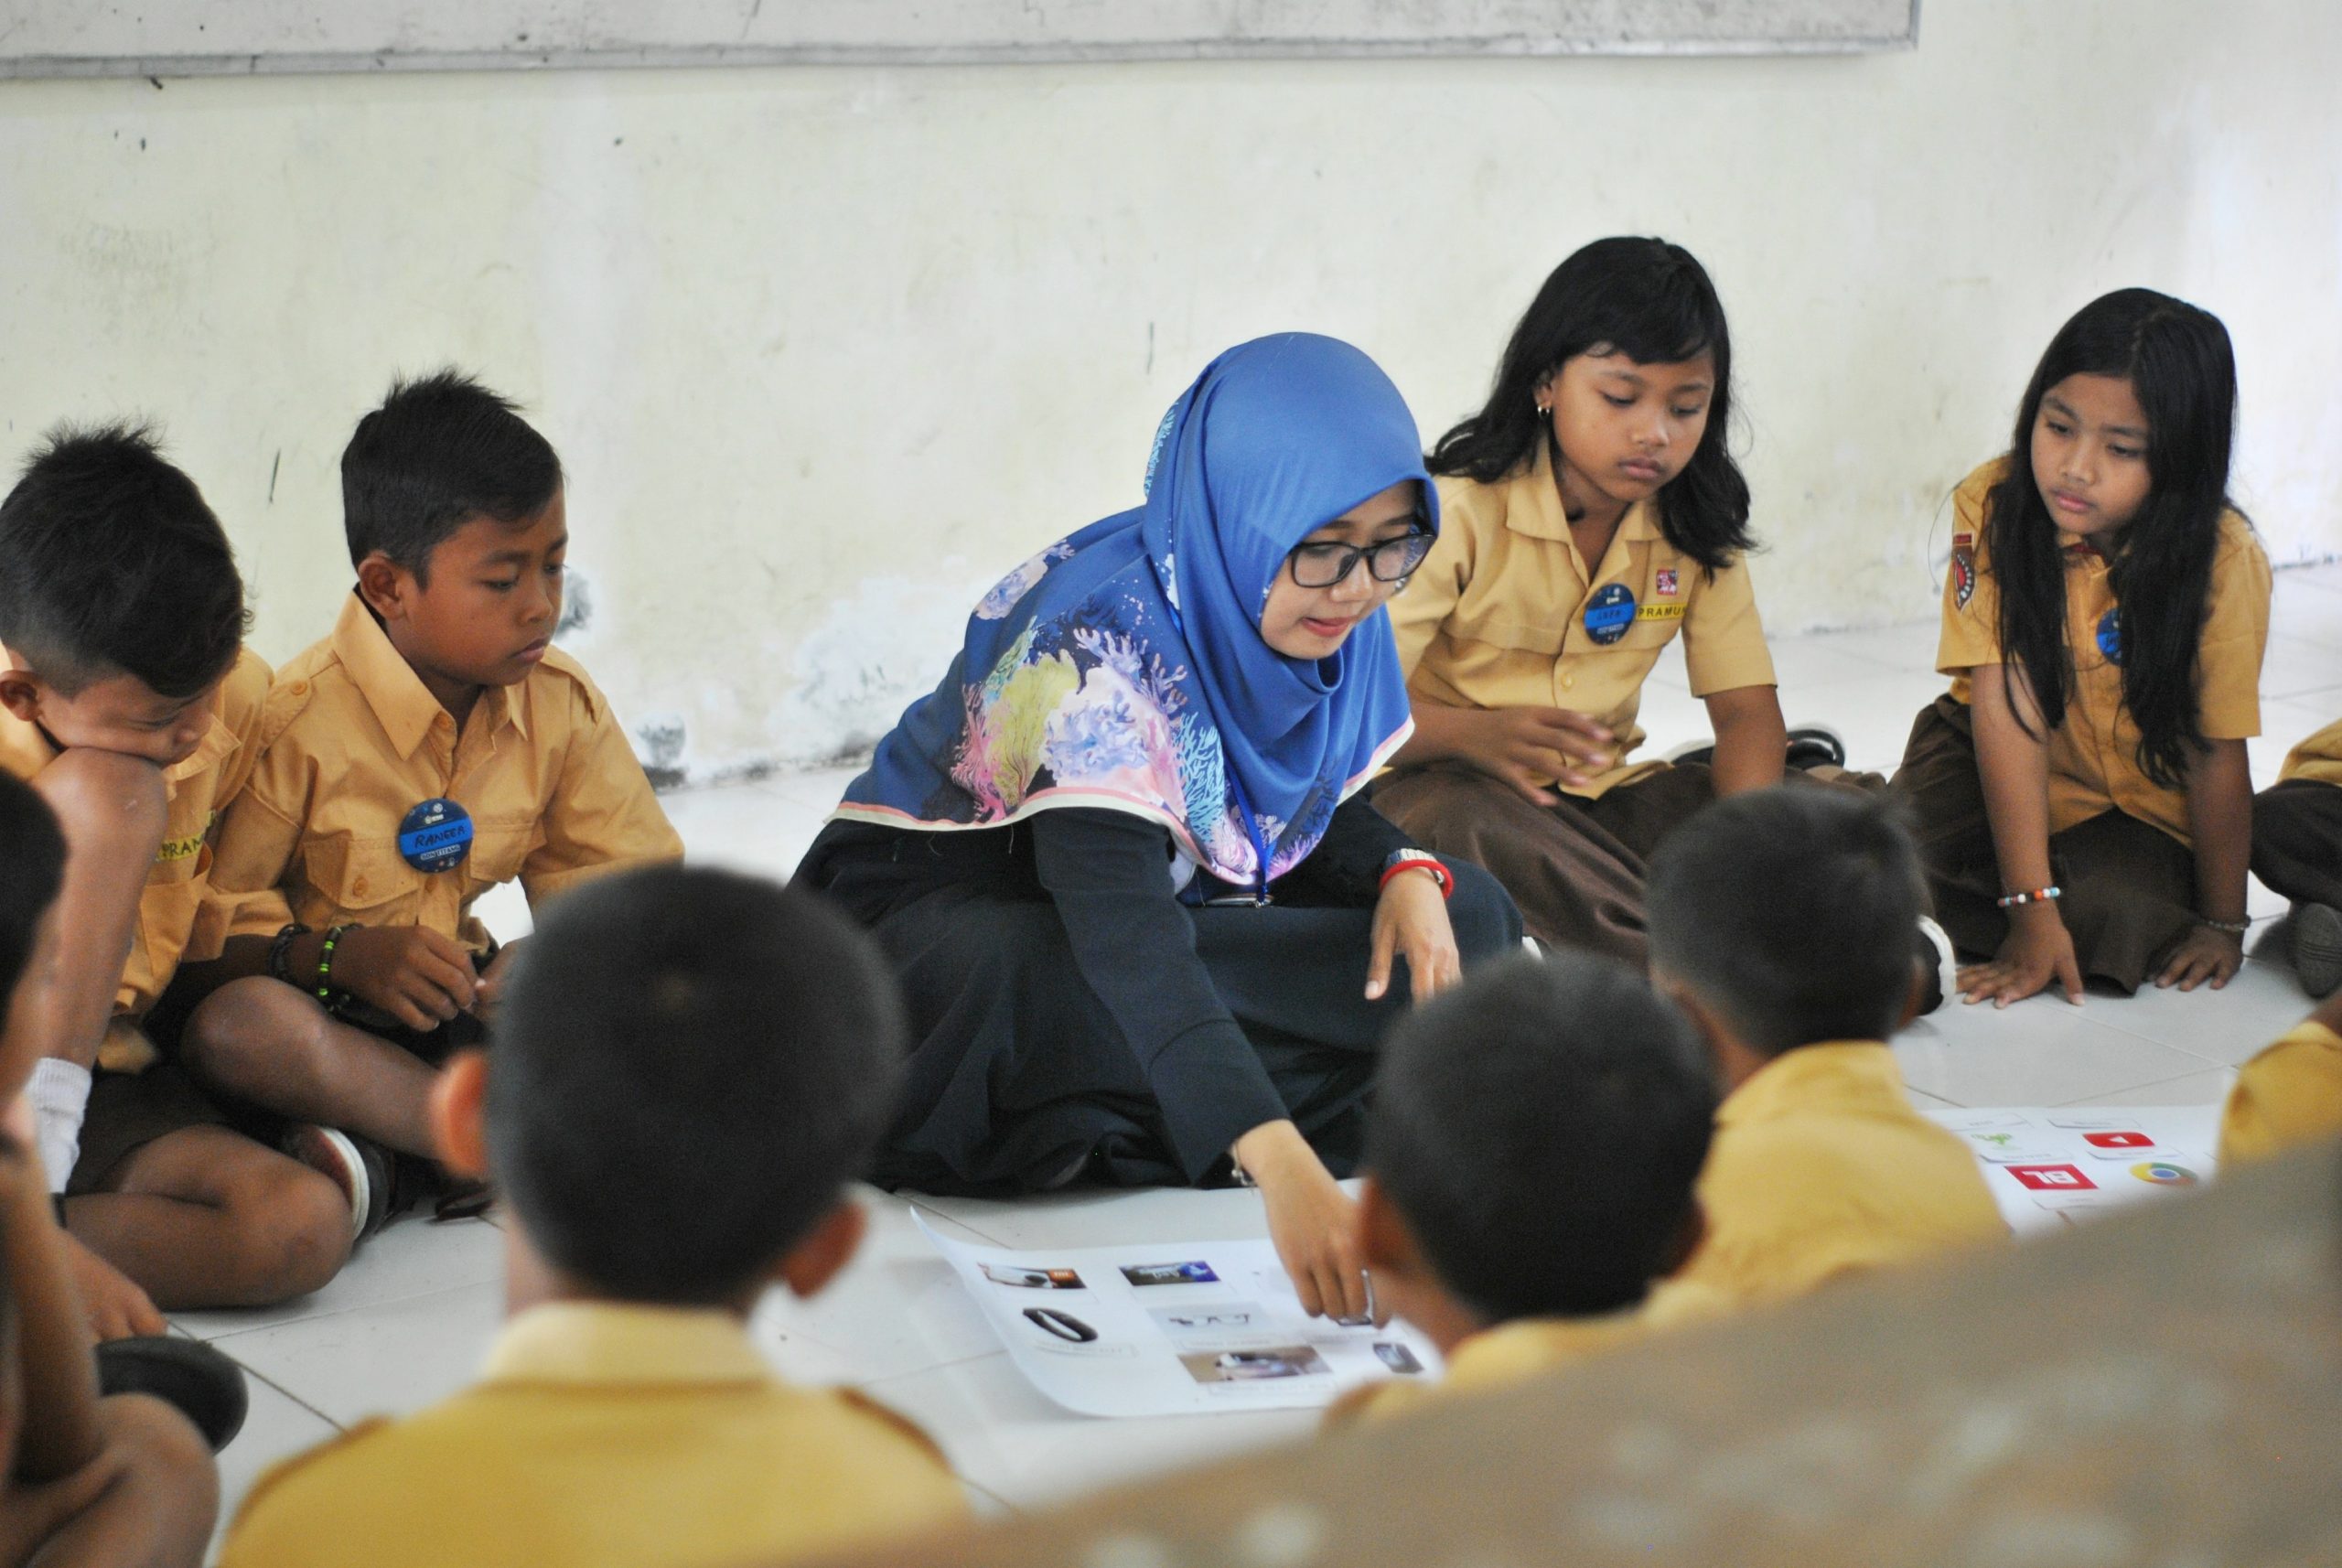 Long distance learning in Indonesia: How much can edtech startups help?